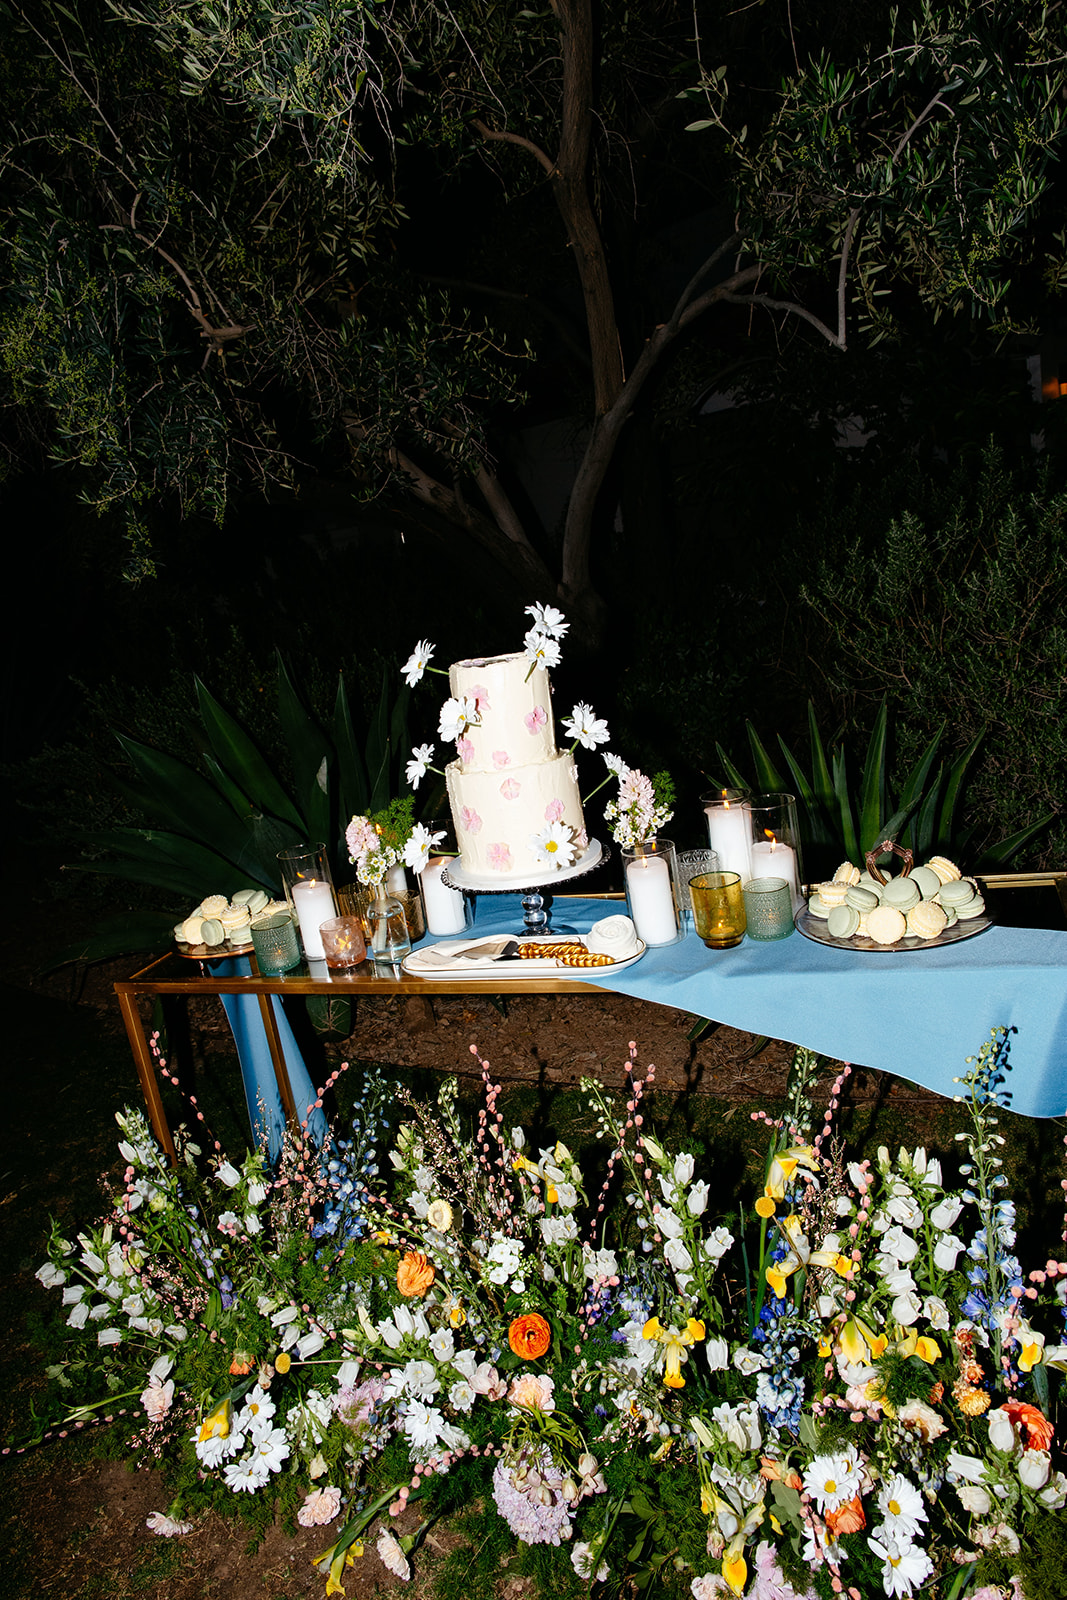 A tiered floral wedding cake on a blue table surrounded by abundant colorful flowers at a nighttime outdoor setting.